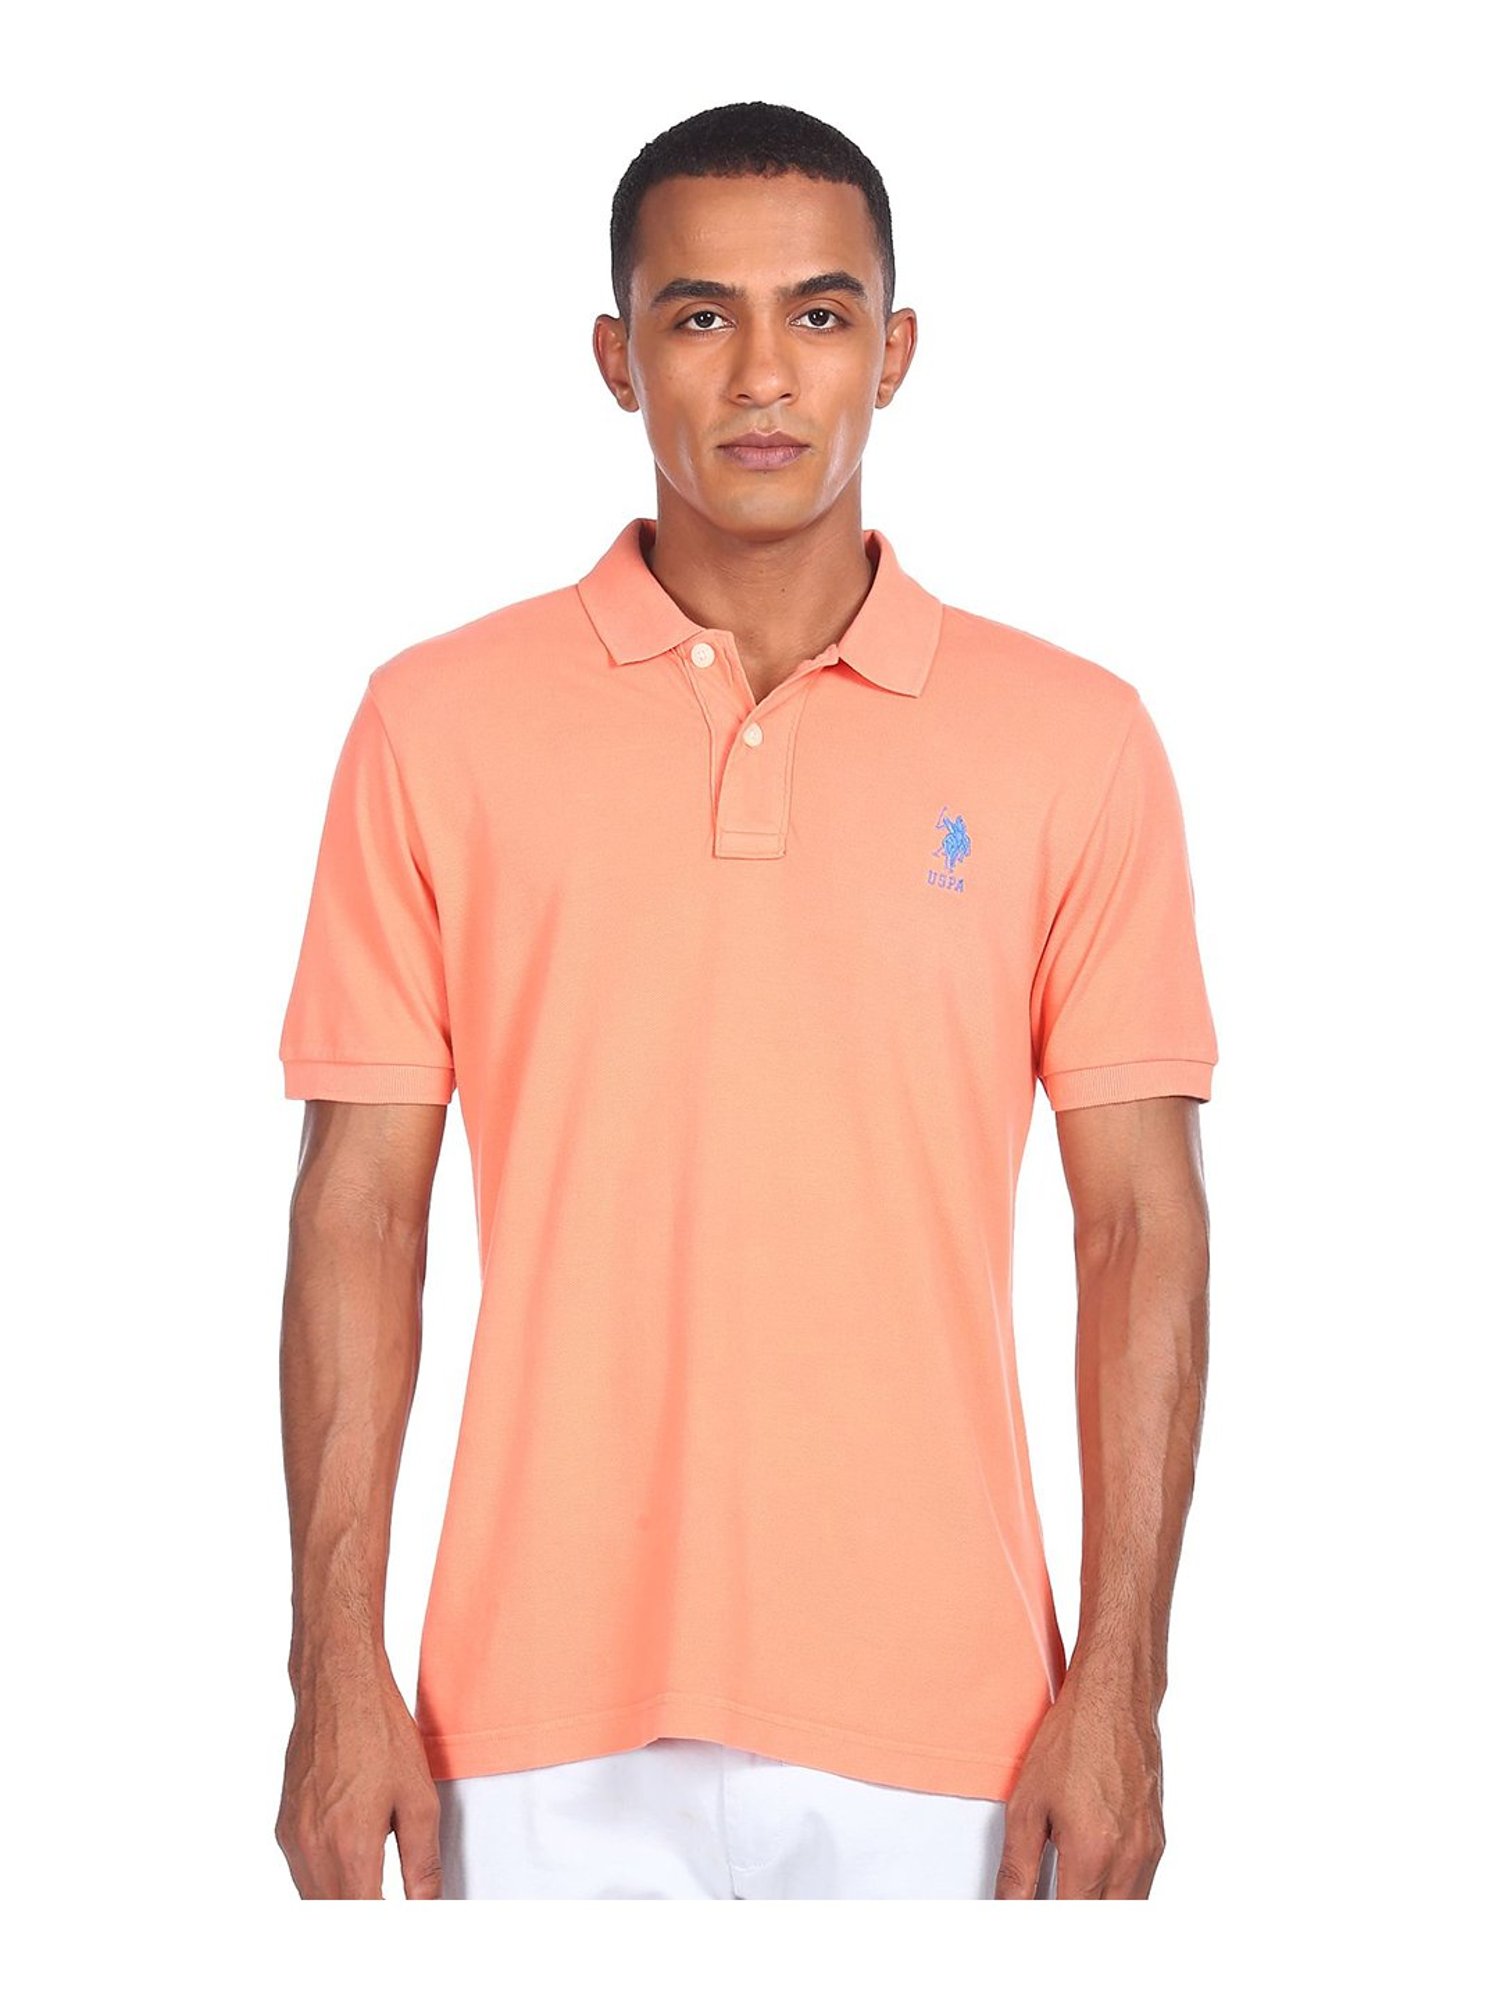 Buy U.S. Polo Assn. Pink Cotton Polo T-Shirt for Men's Online